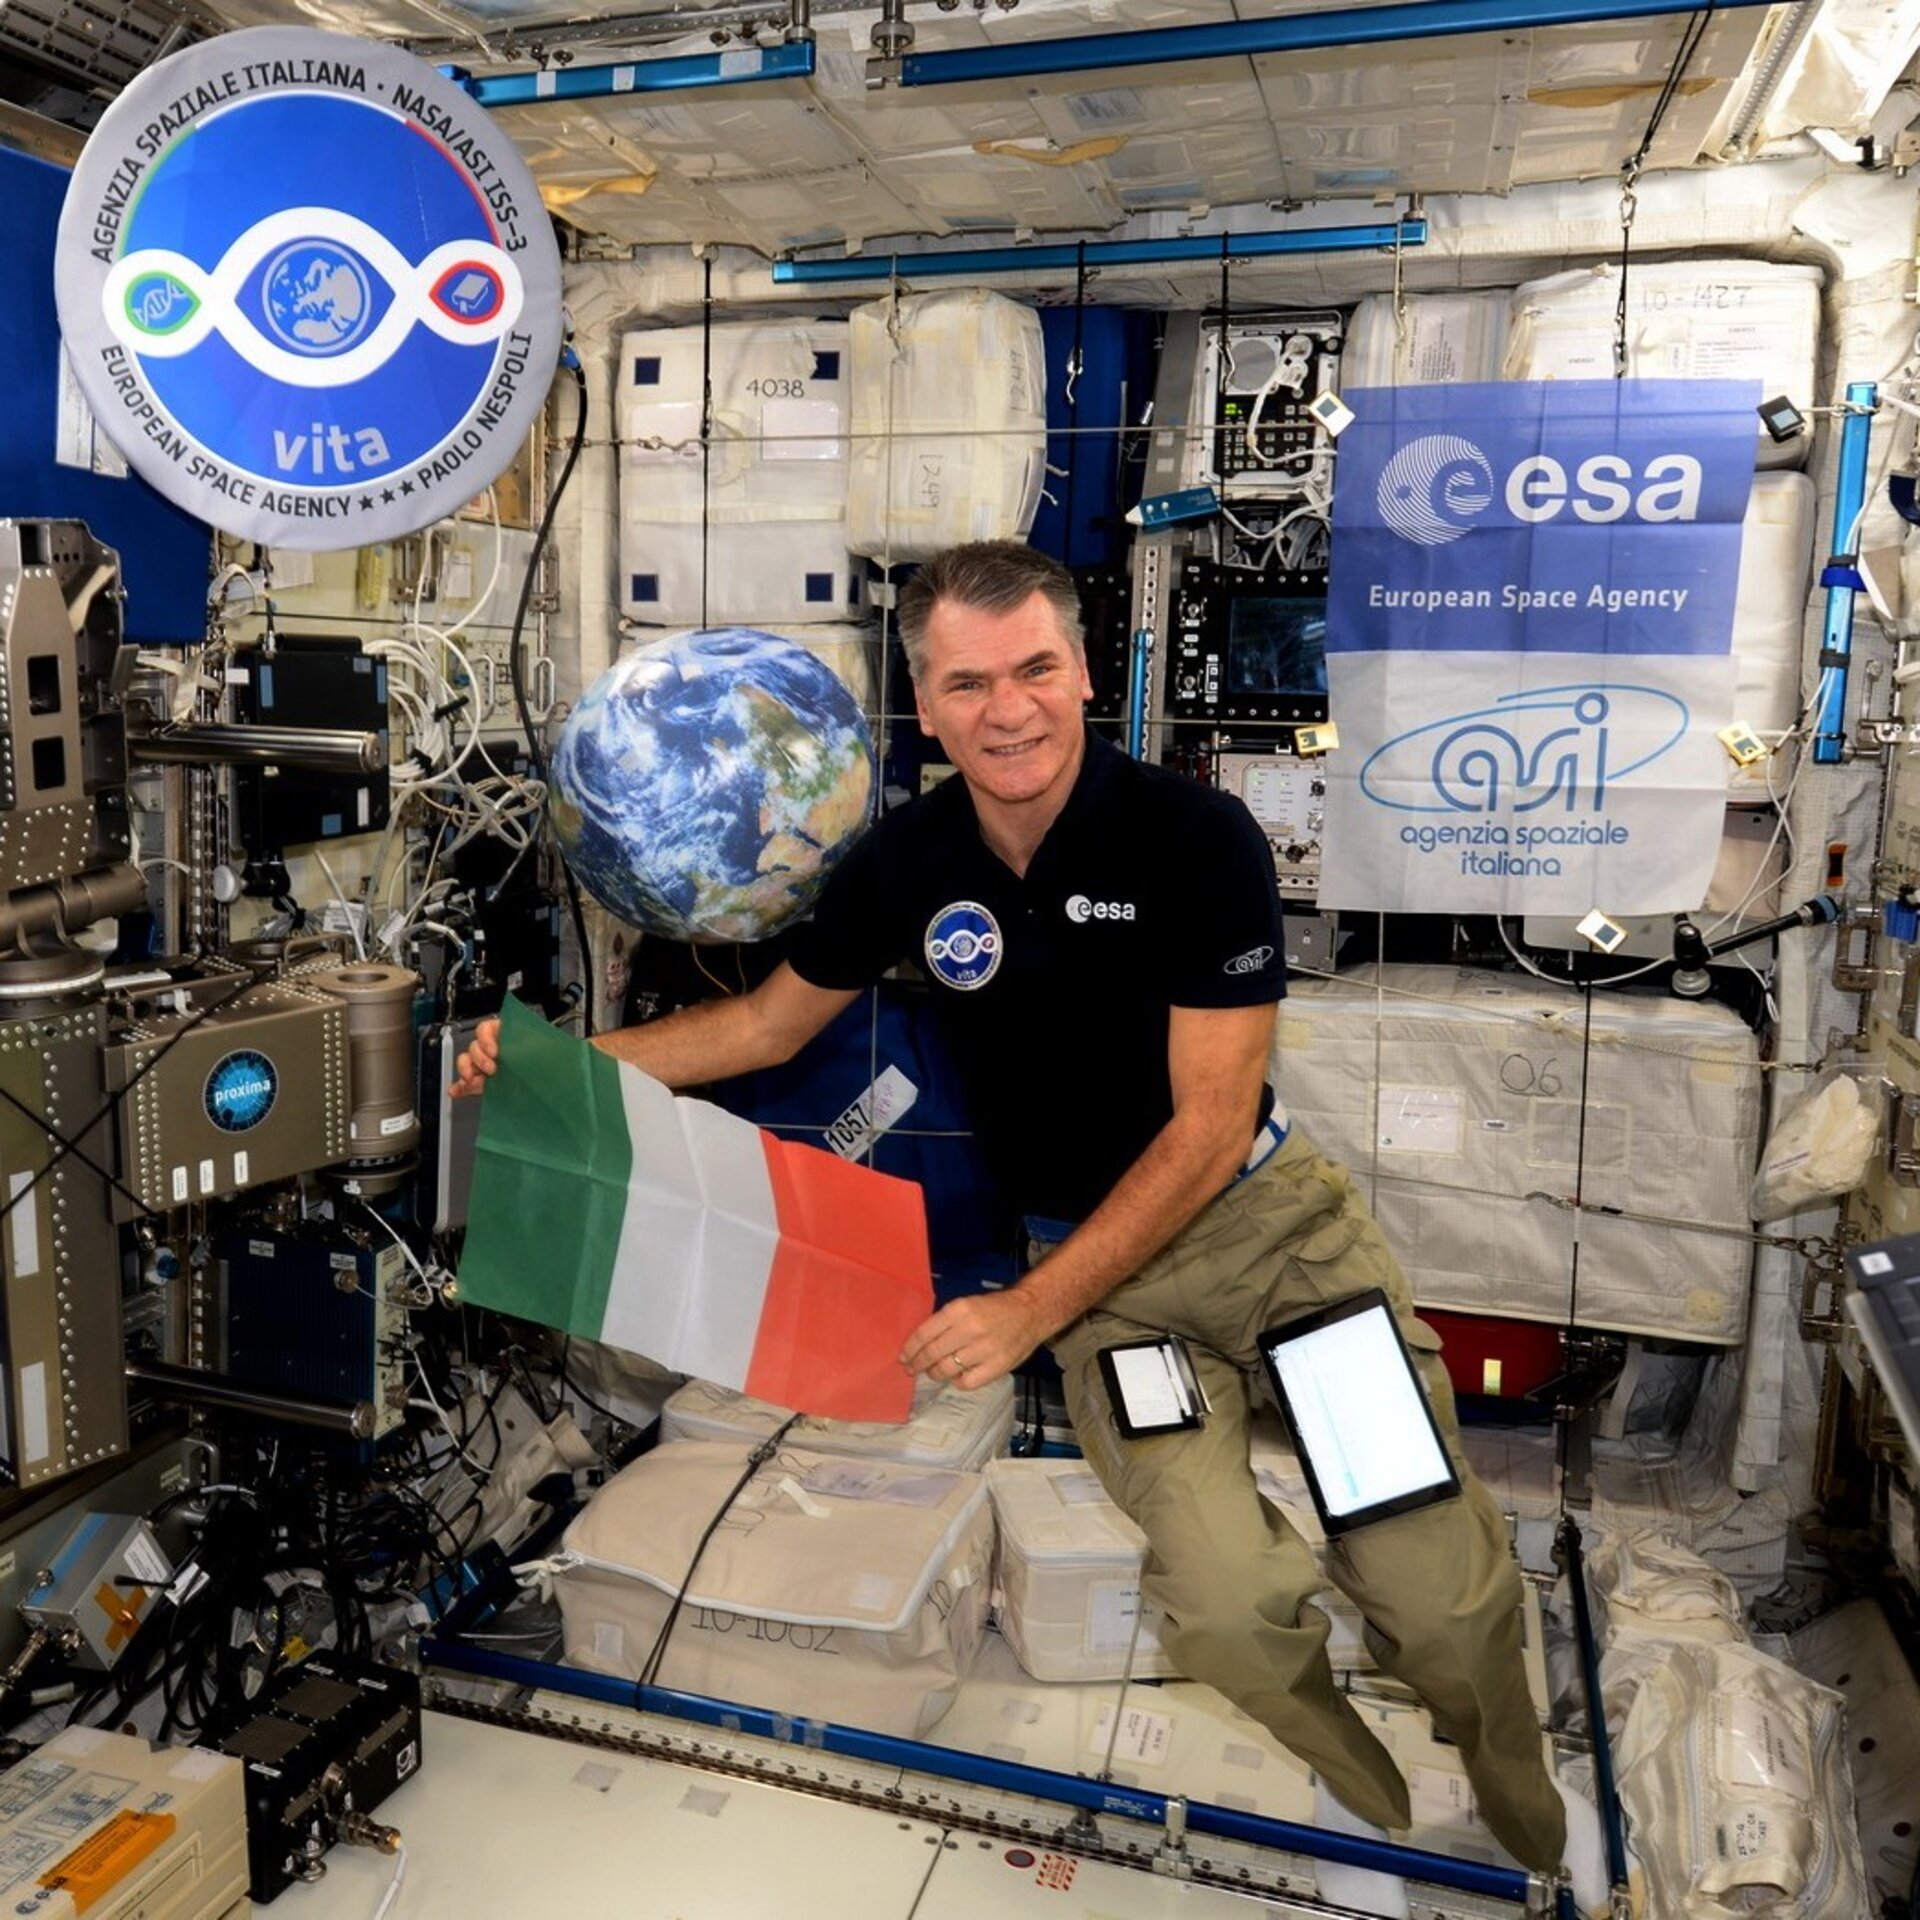 Paolo on the ISS